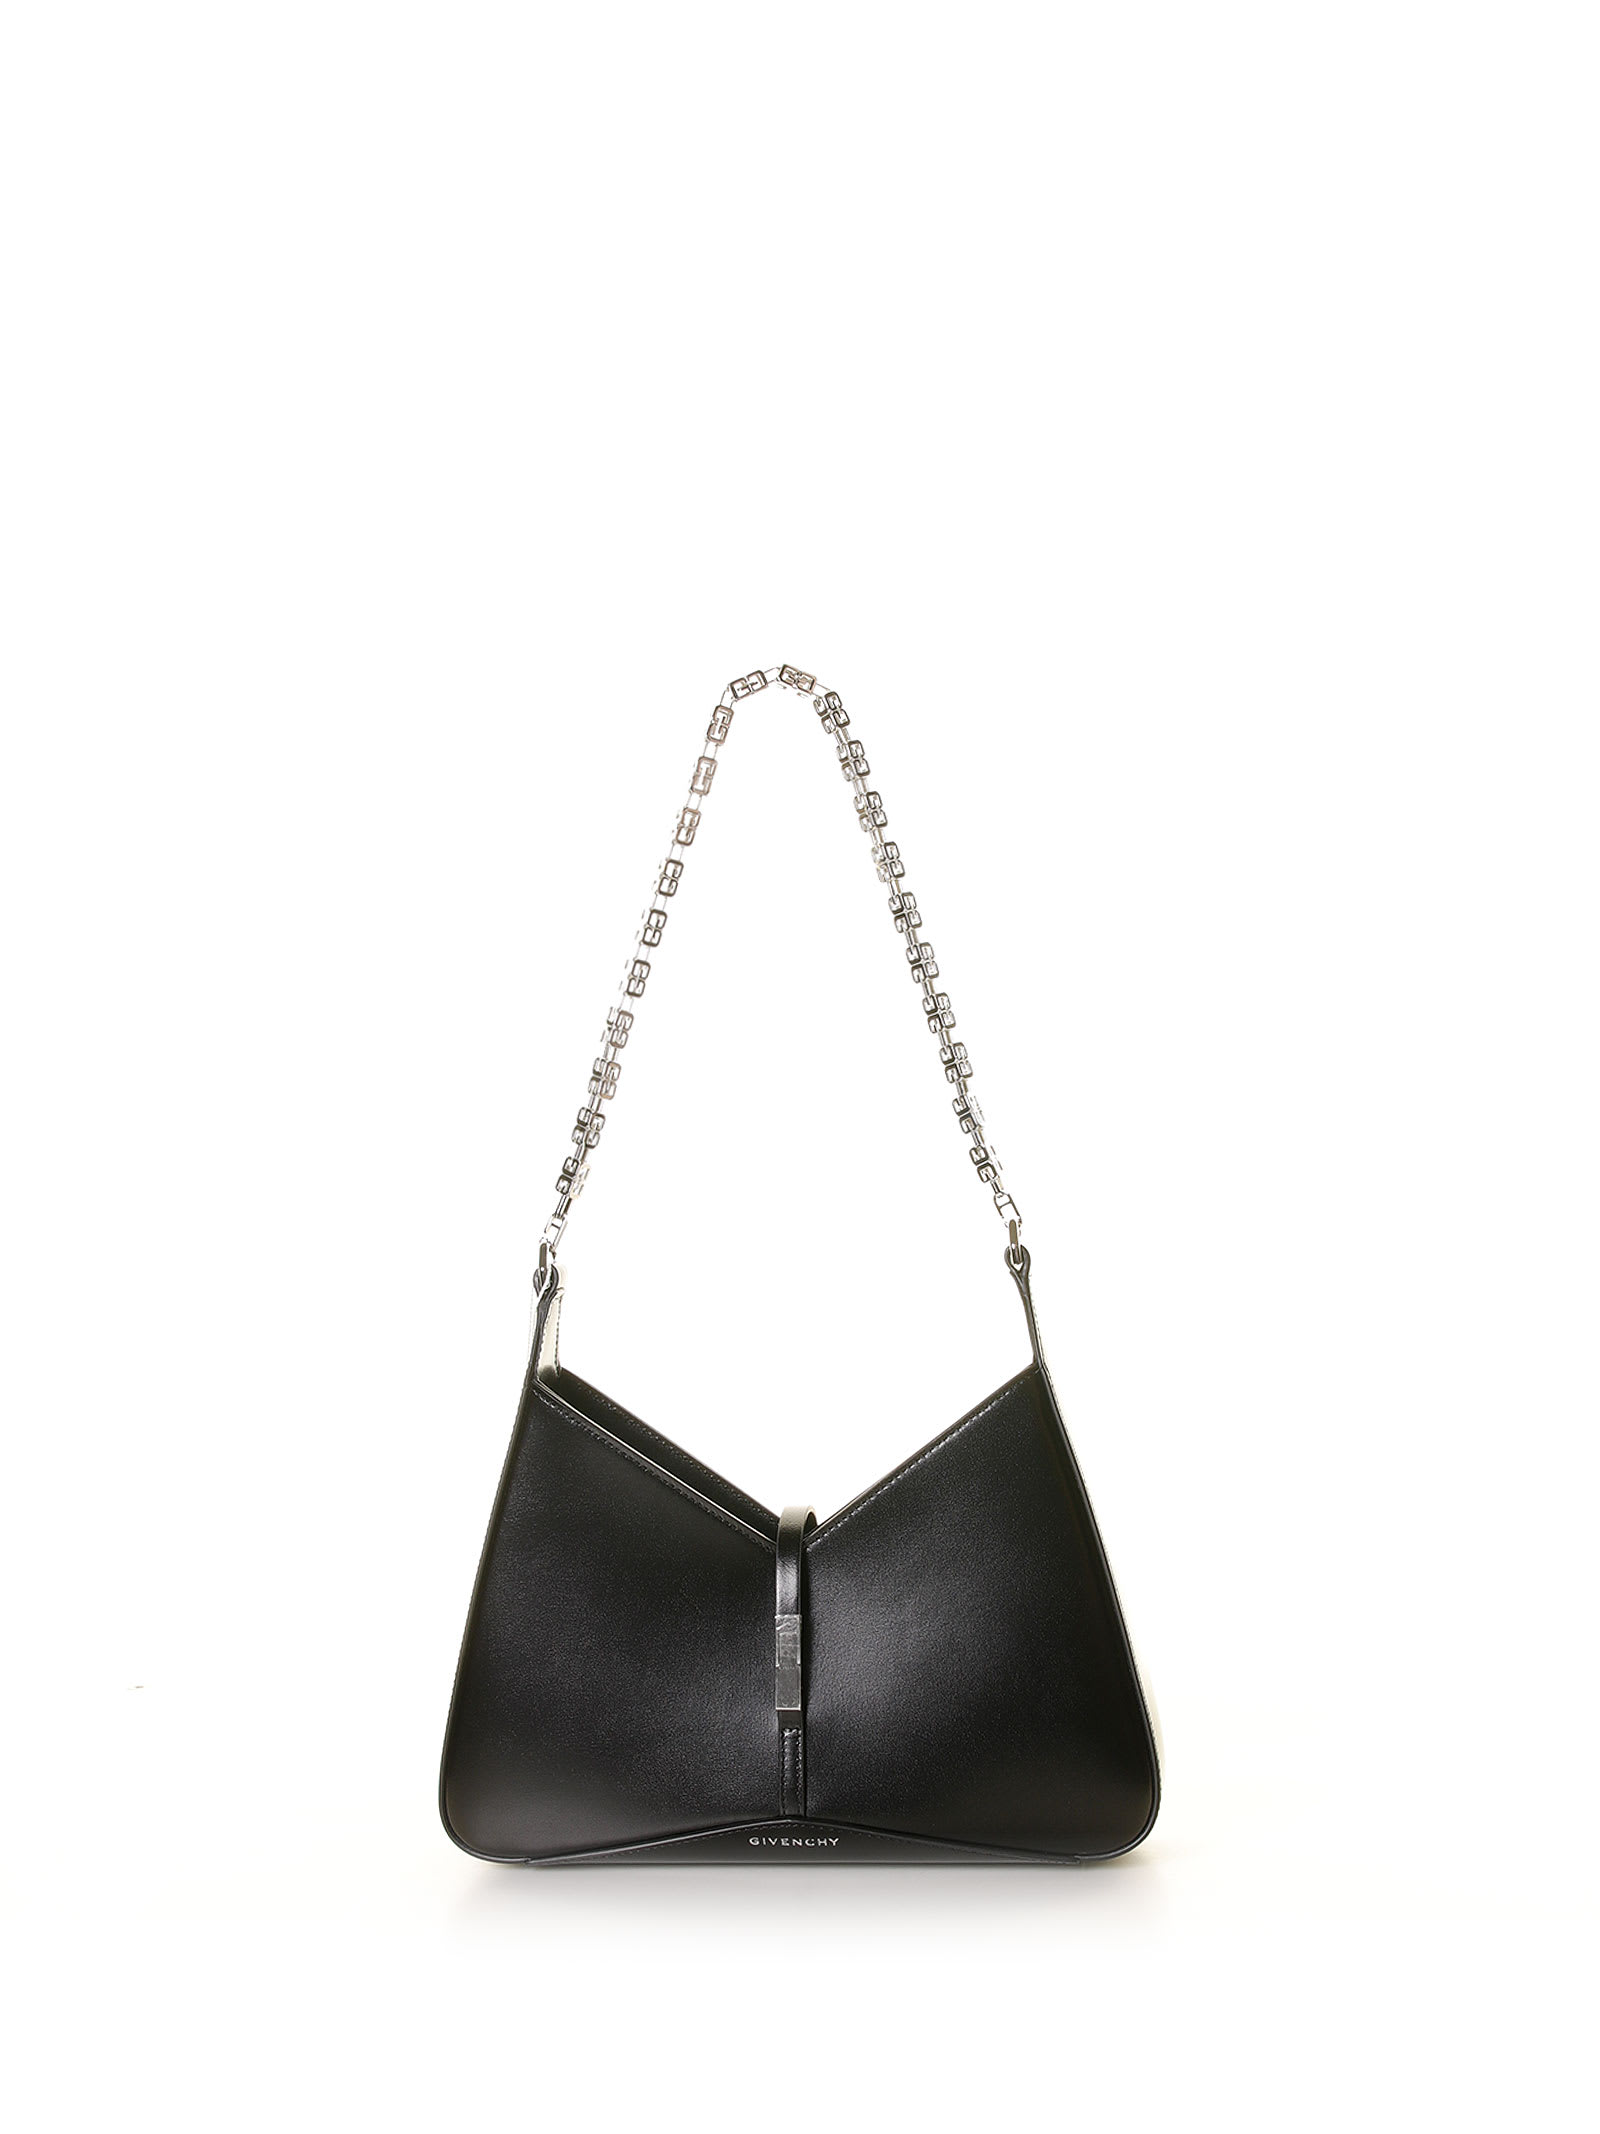 GIVENCHY SMALL CUT OUT BAG IN SHINY LEATHER WITH CHAIN